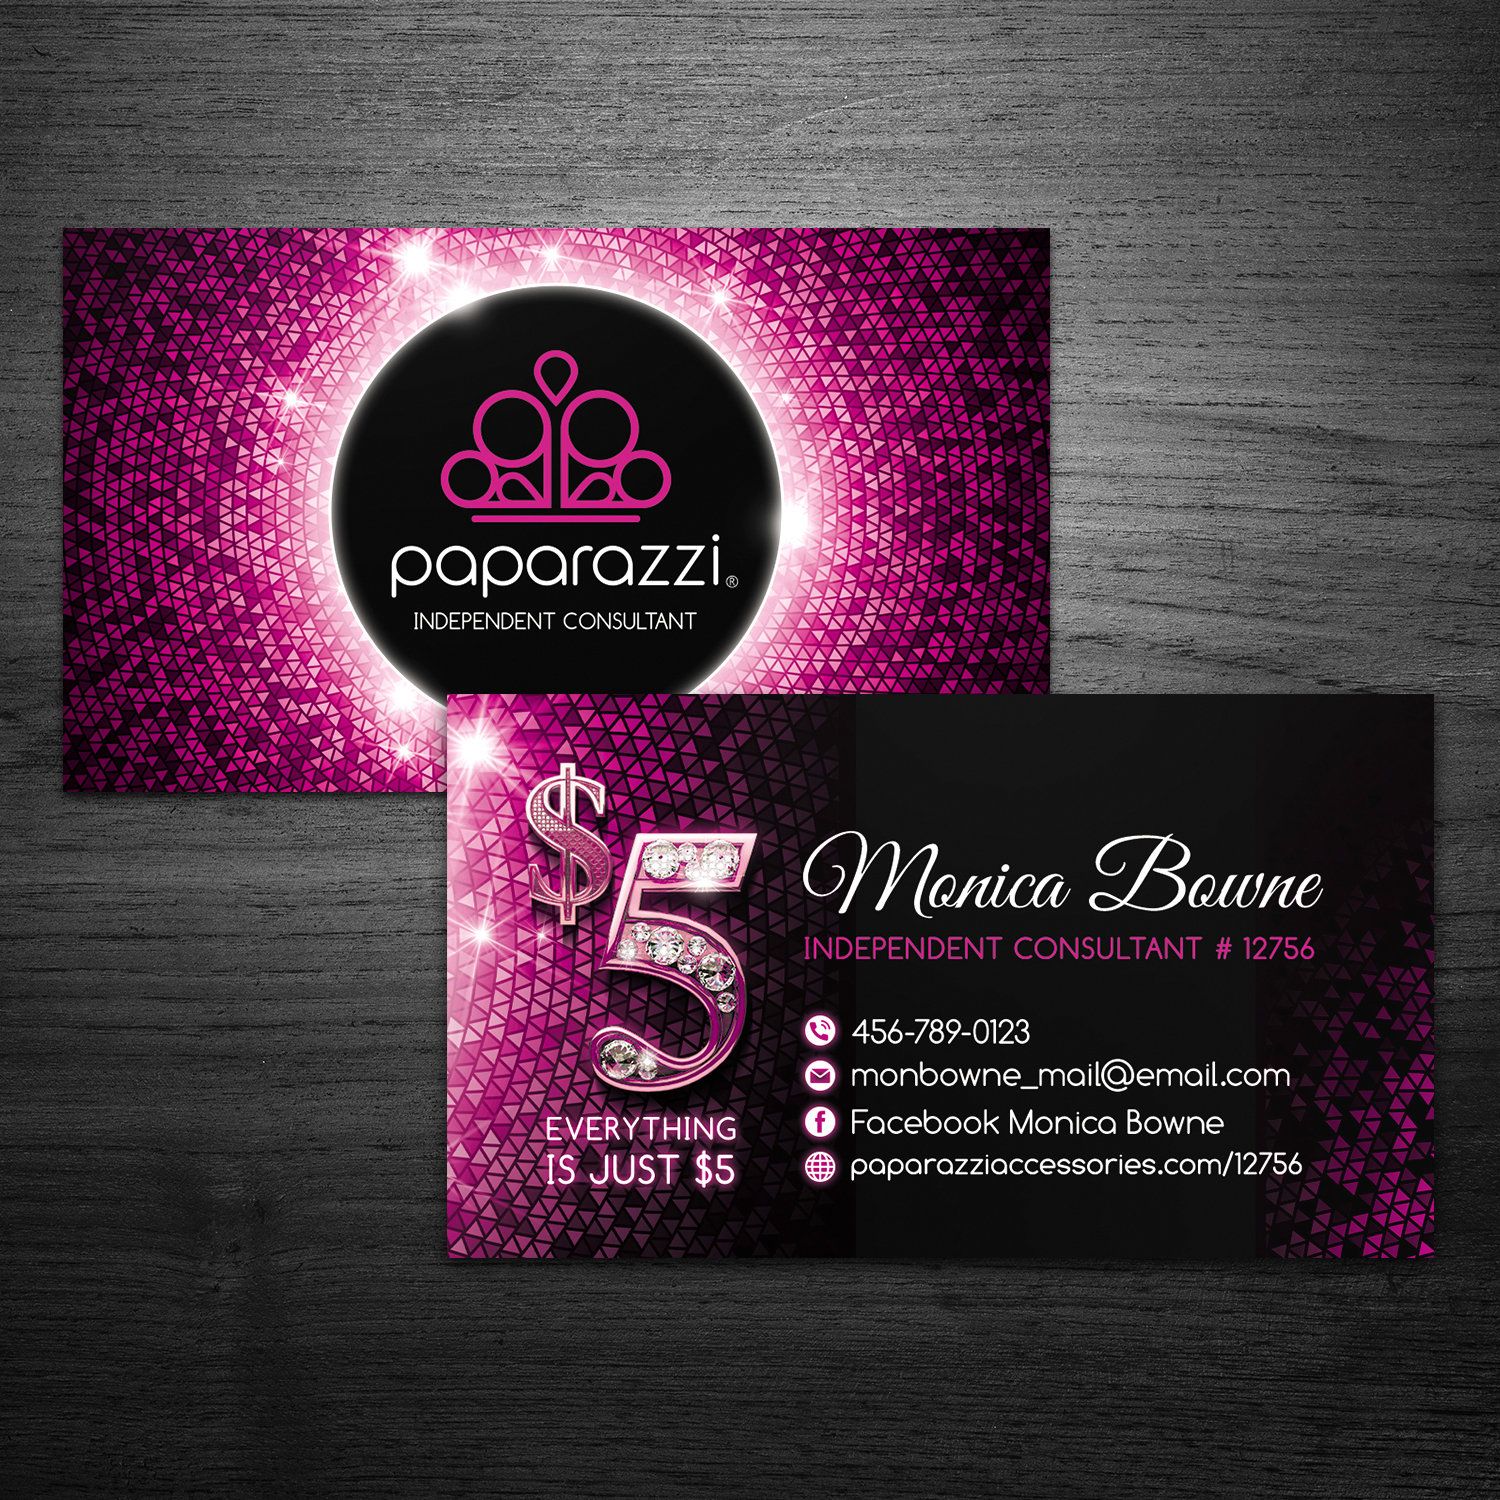 paparazzi business cards free 3